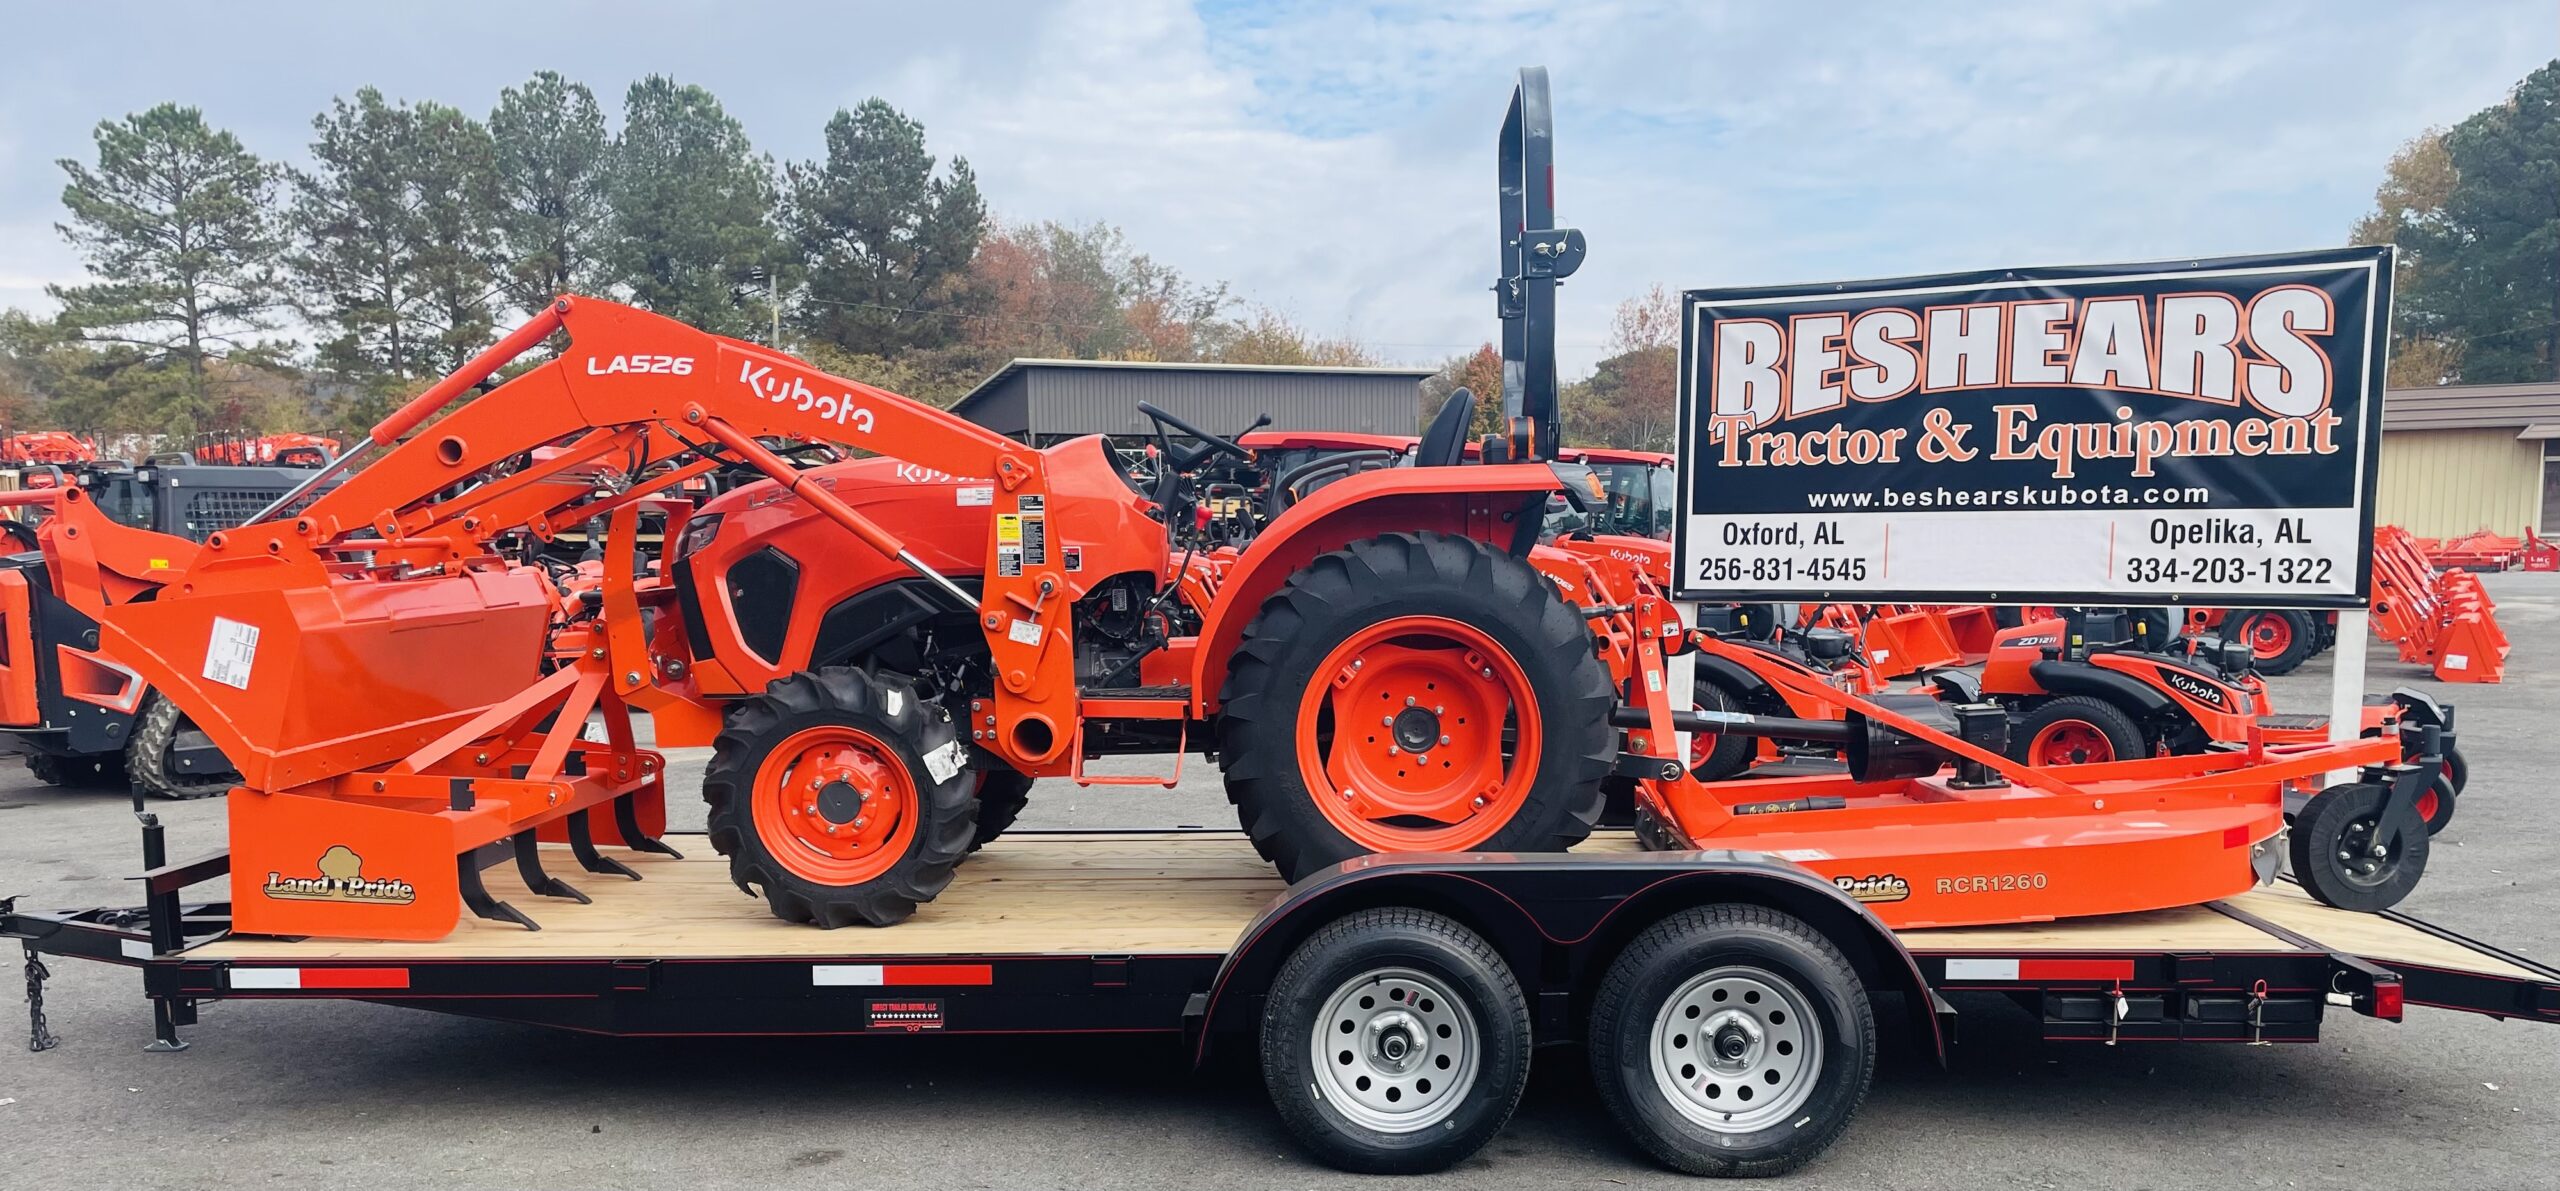 Get the Best Kubota Tractor Deals: Save Big on Your Purchase!